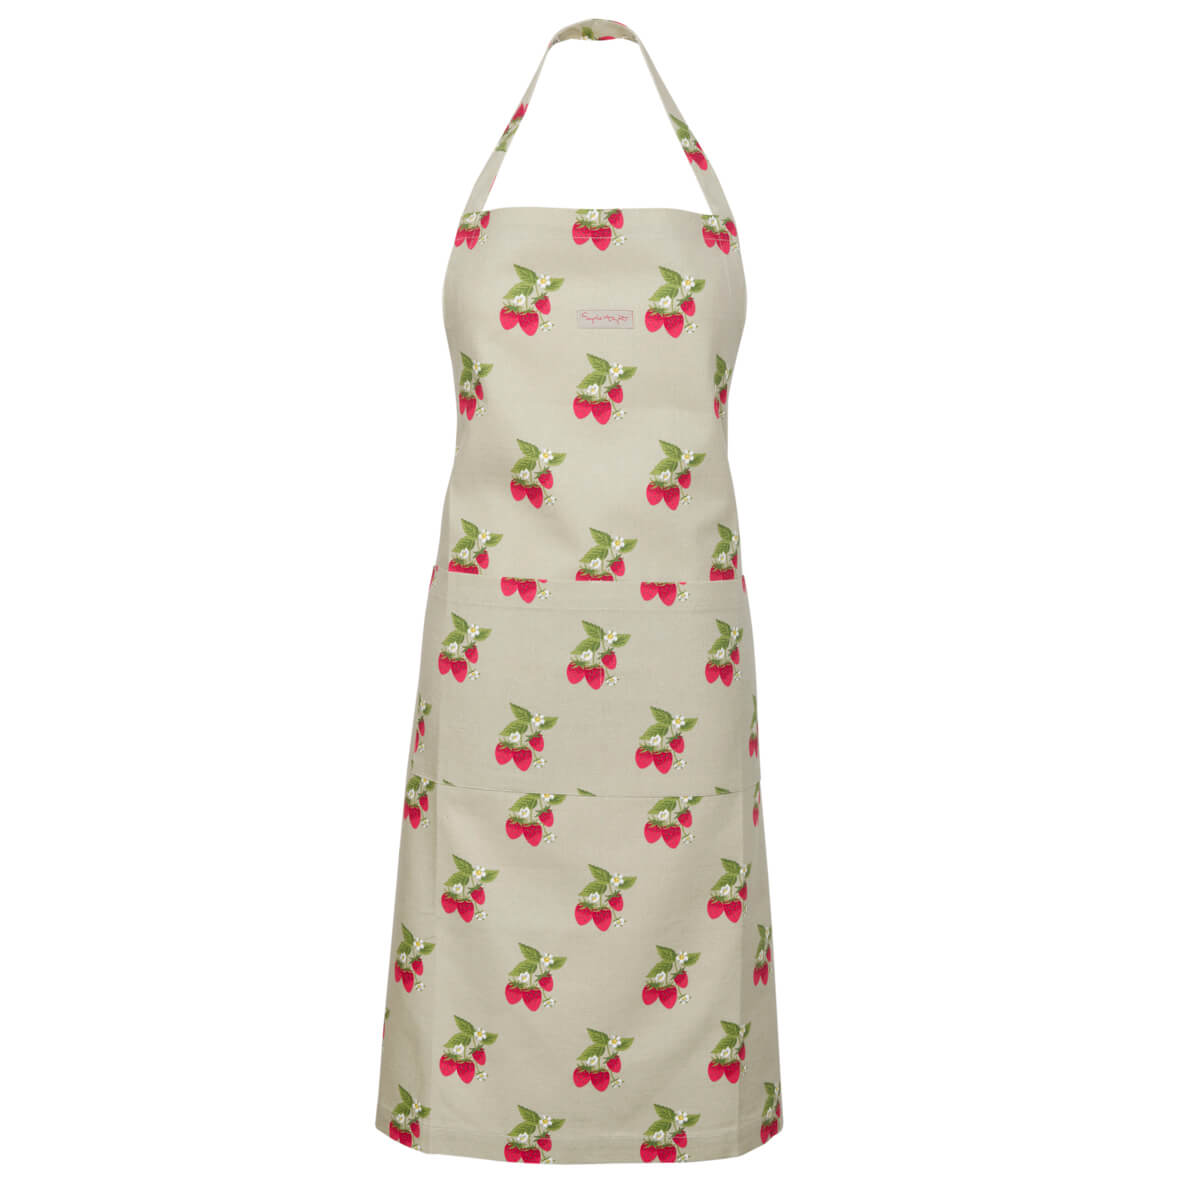 Strawberries Adult Apron by Sophie Allport